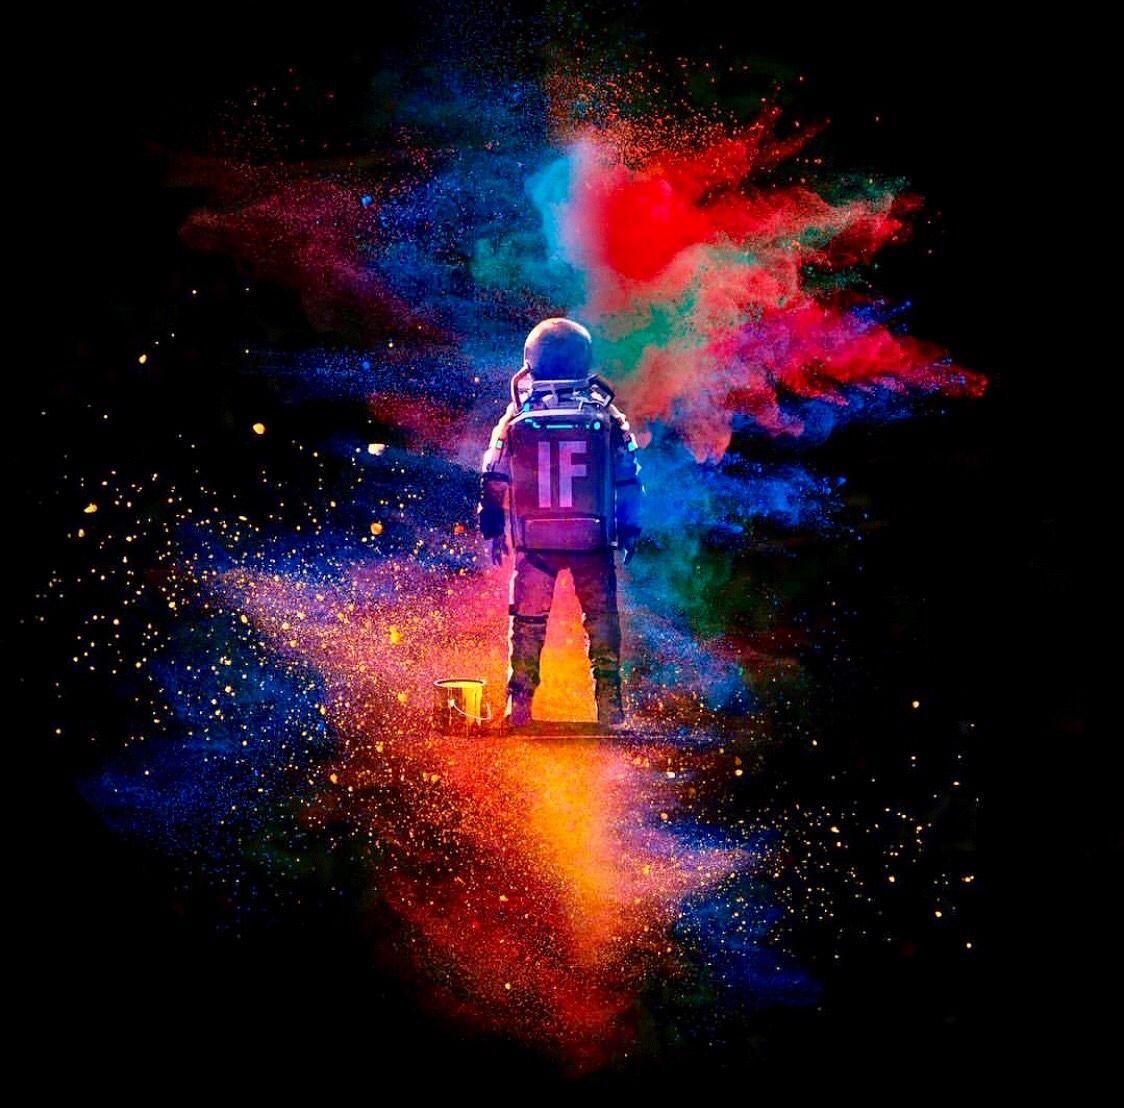 Psychedelic Astronaut Wallpaper Free Psychedelic Astronaut Background